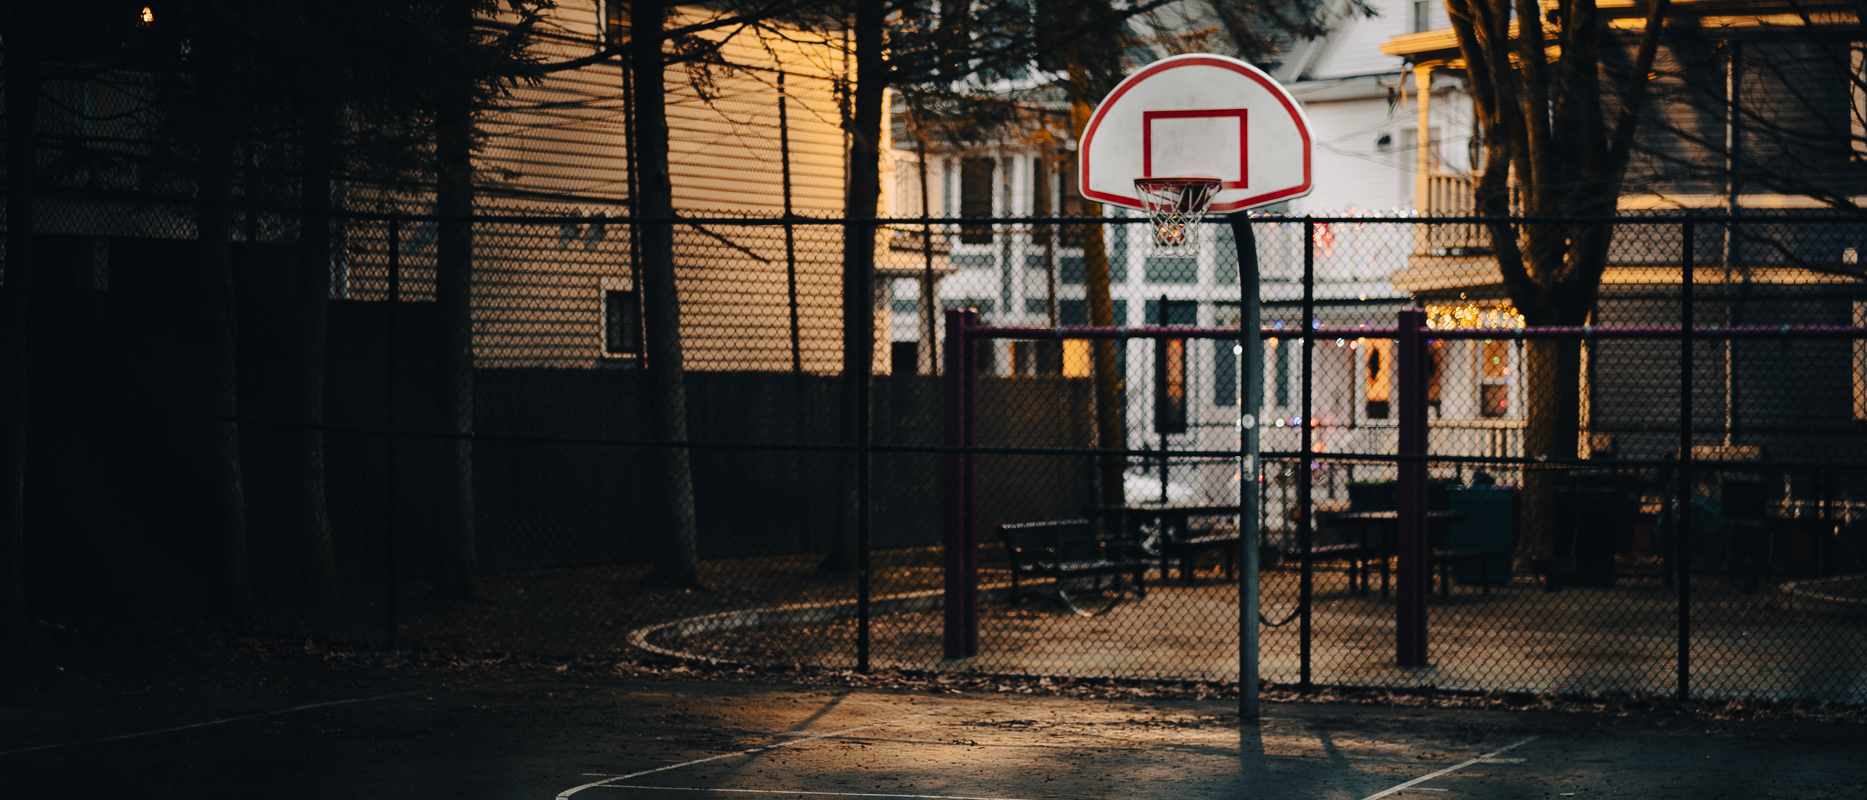 A very dramatic, cinematic photo of a basketball court in front of some houses